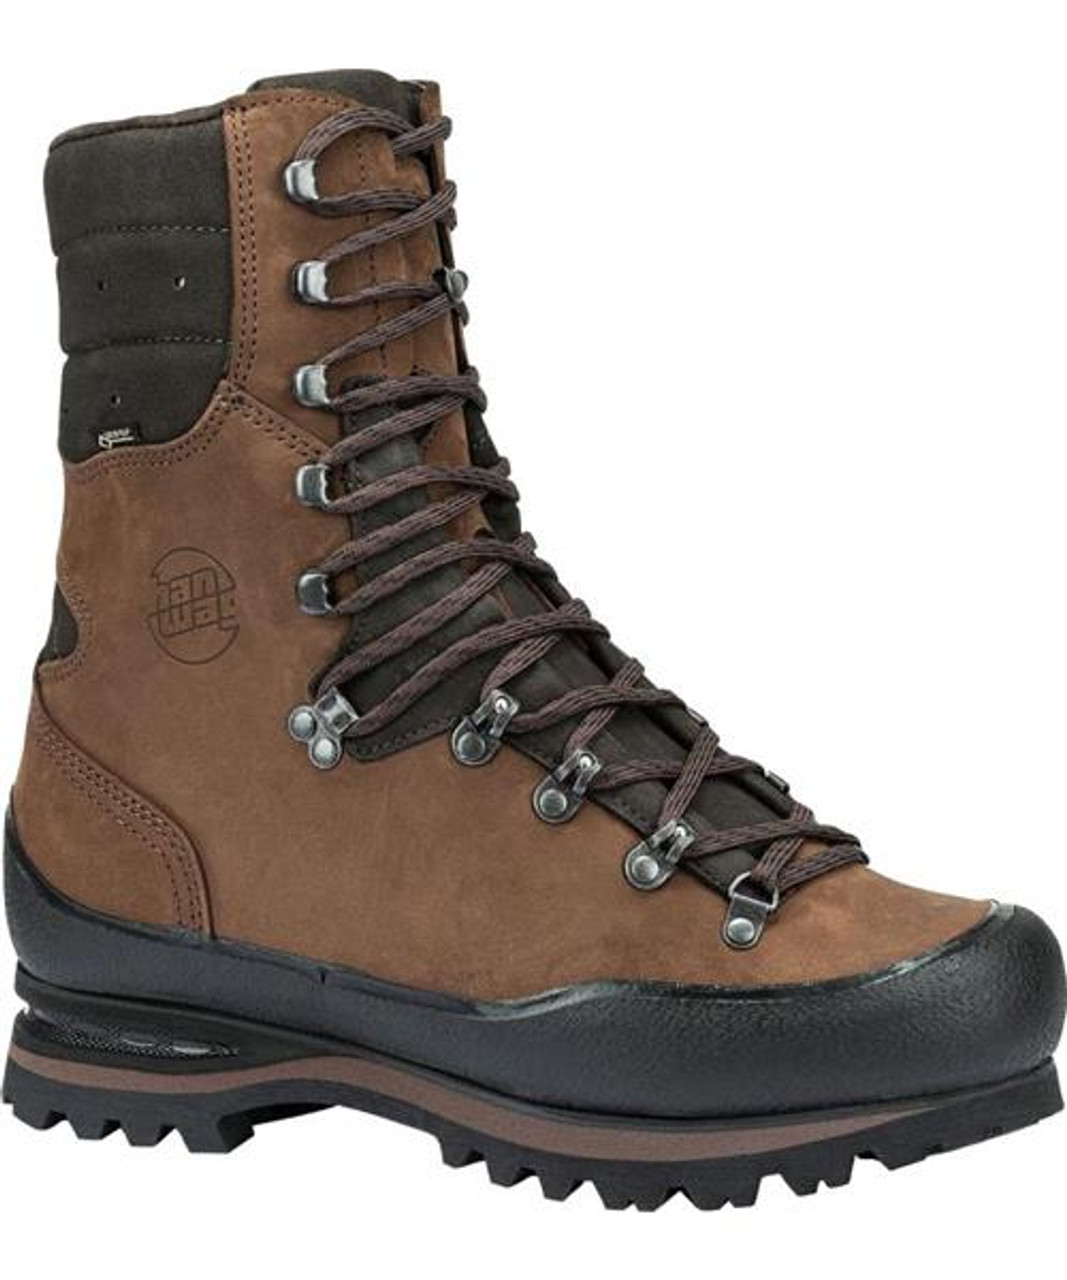 Hanwag Trapper Top GTX | Free Shipping Canada-wide